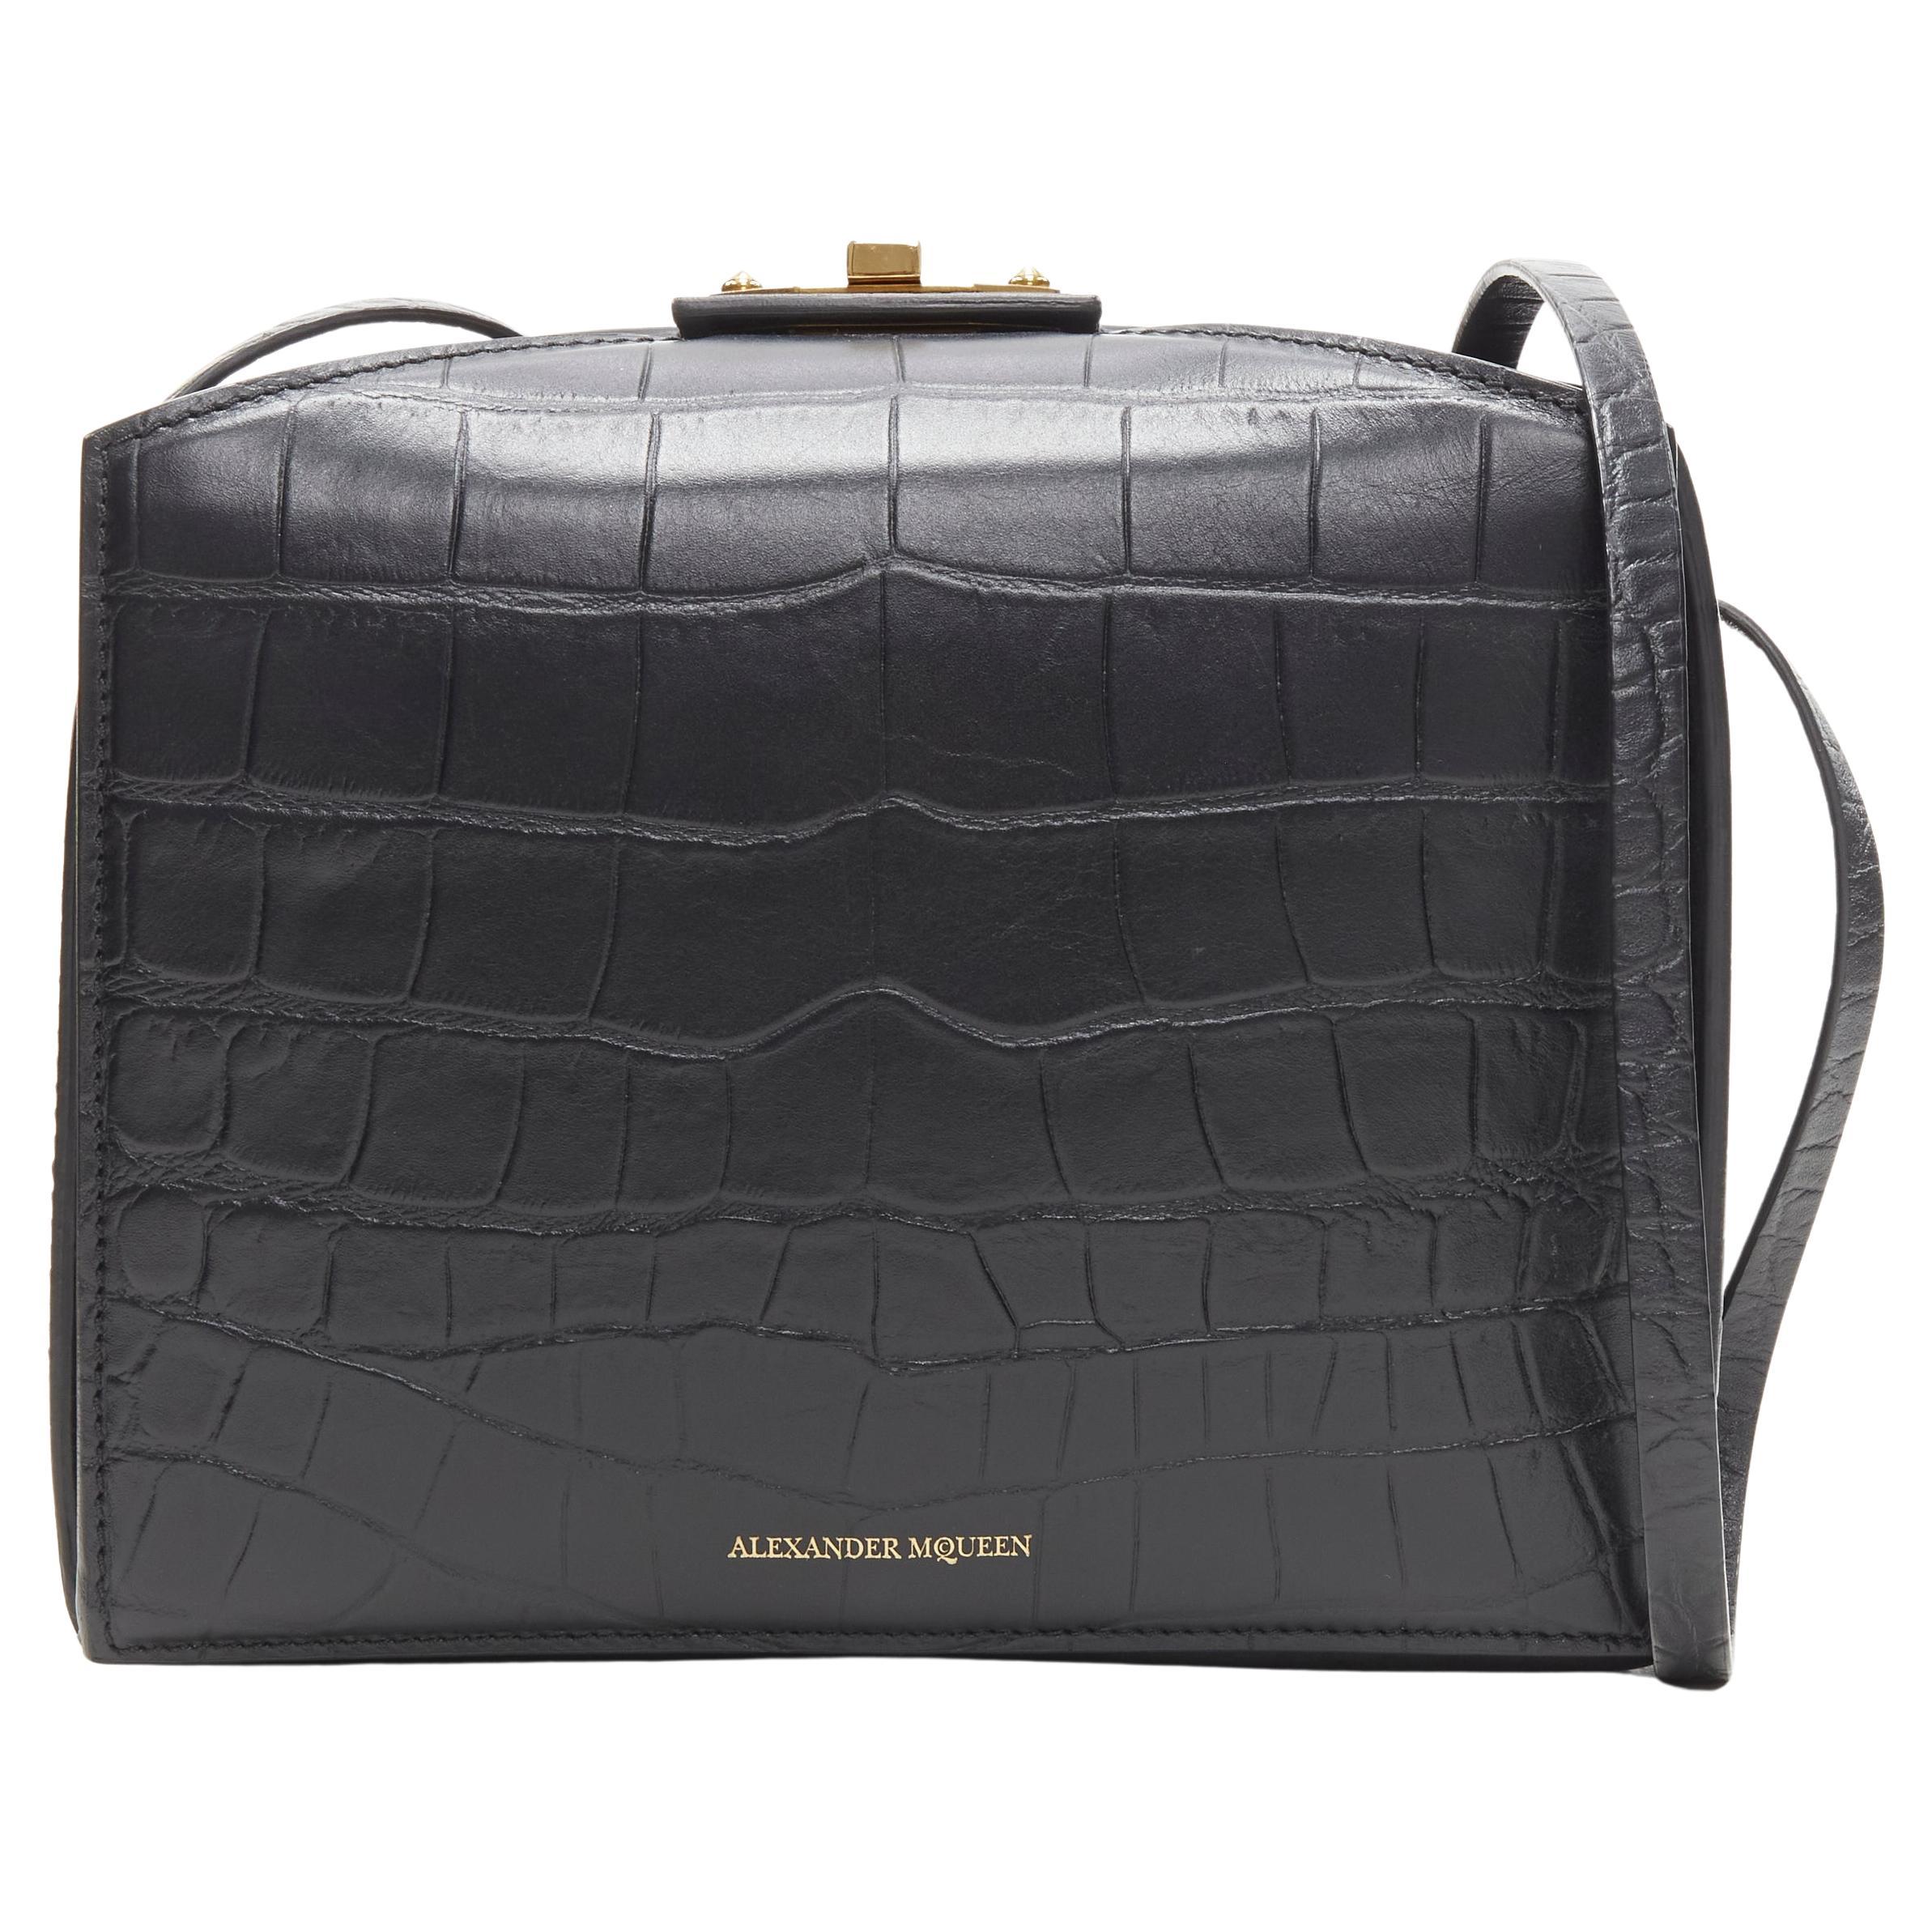 ALEXANDER MCQUEEN The Box black stamped croc gold turn lock crossbody bag For Sale